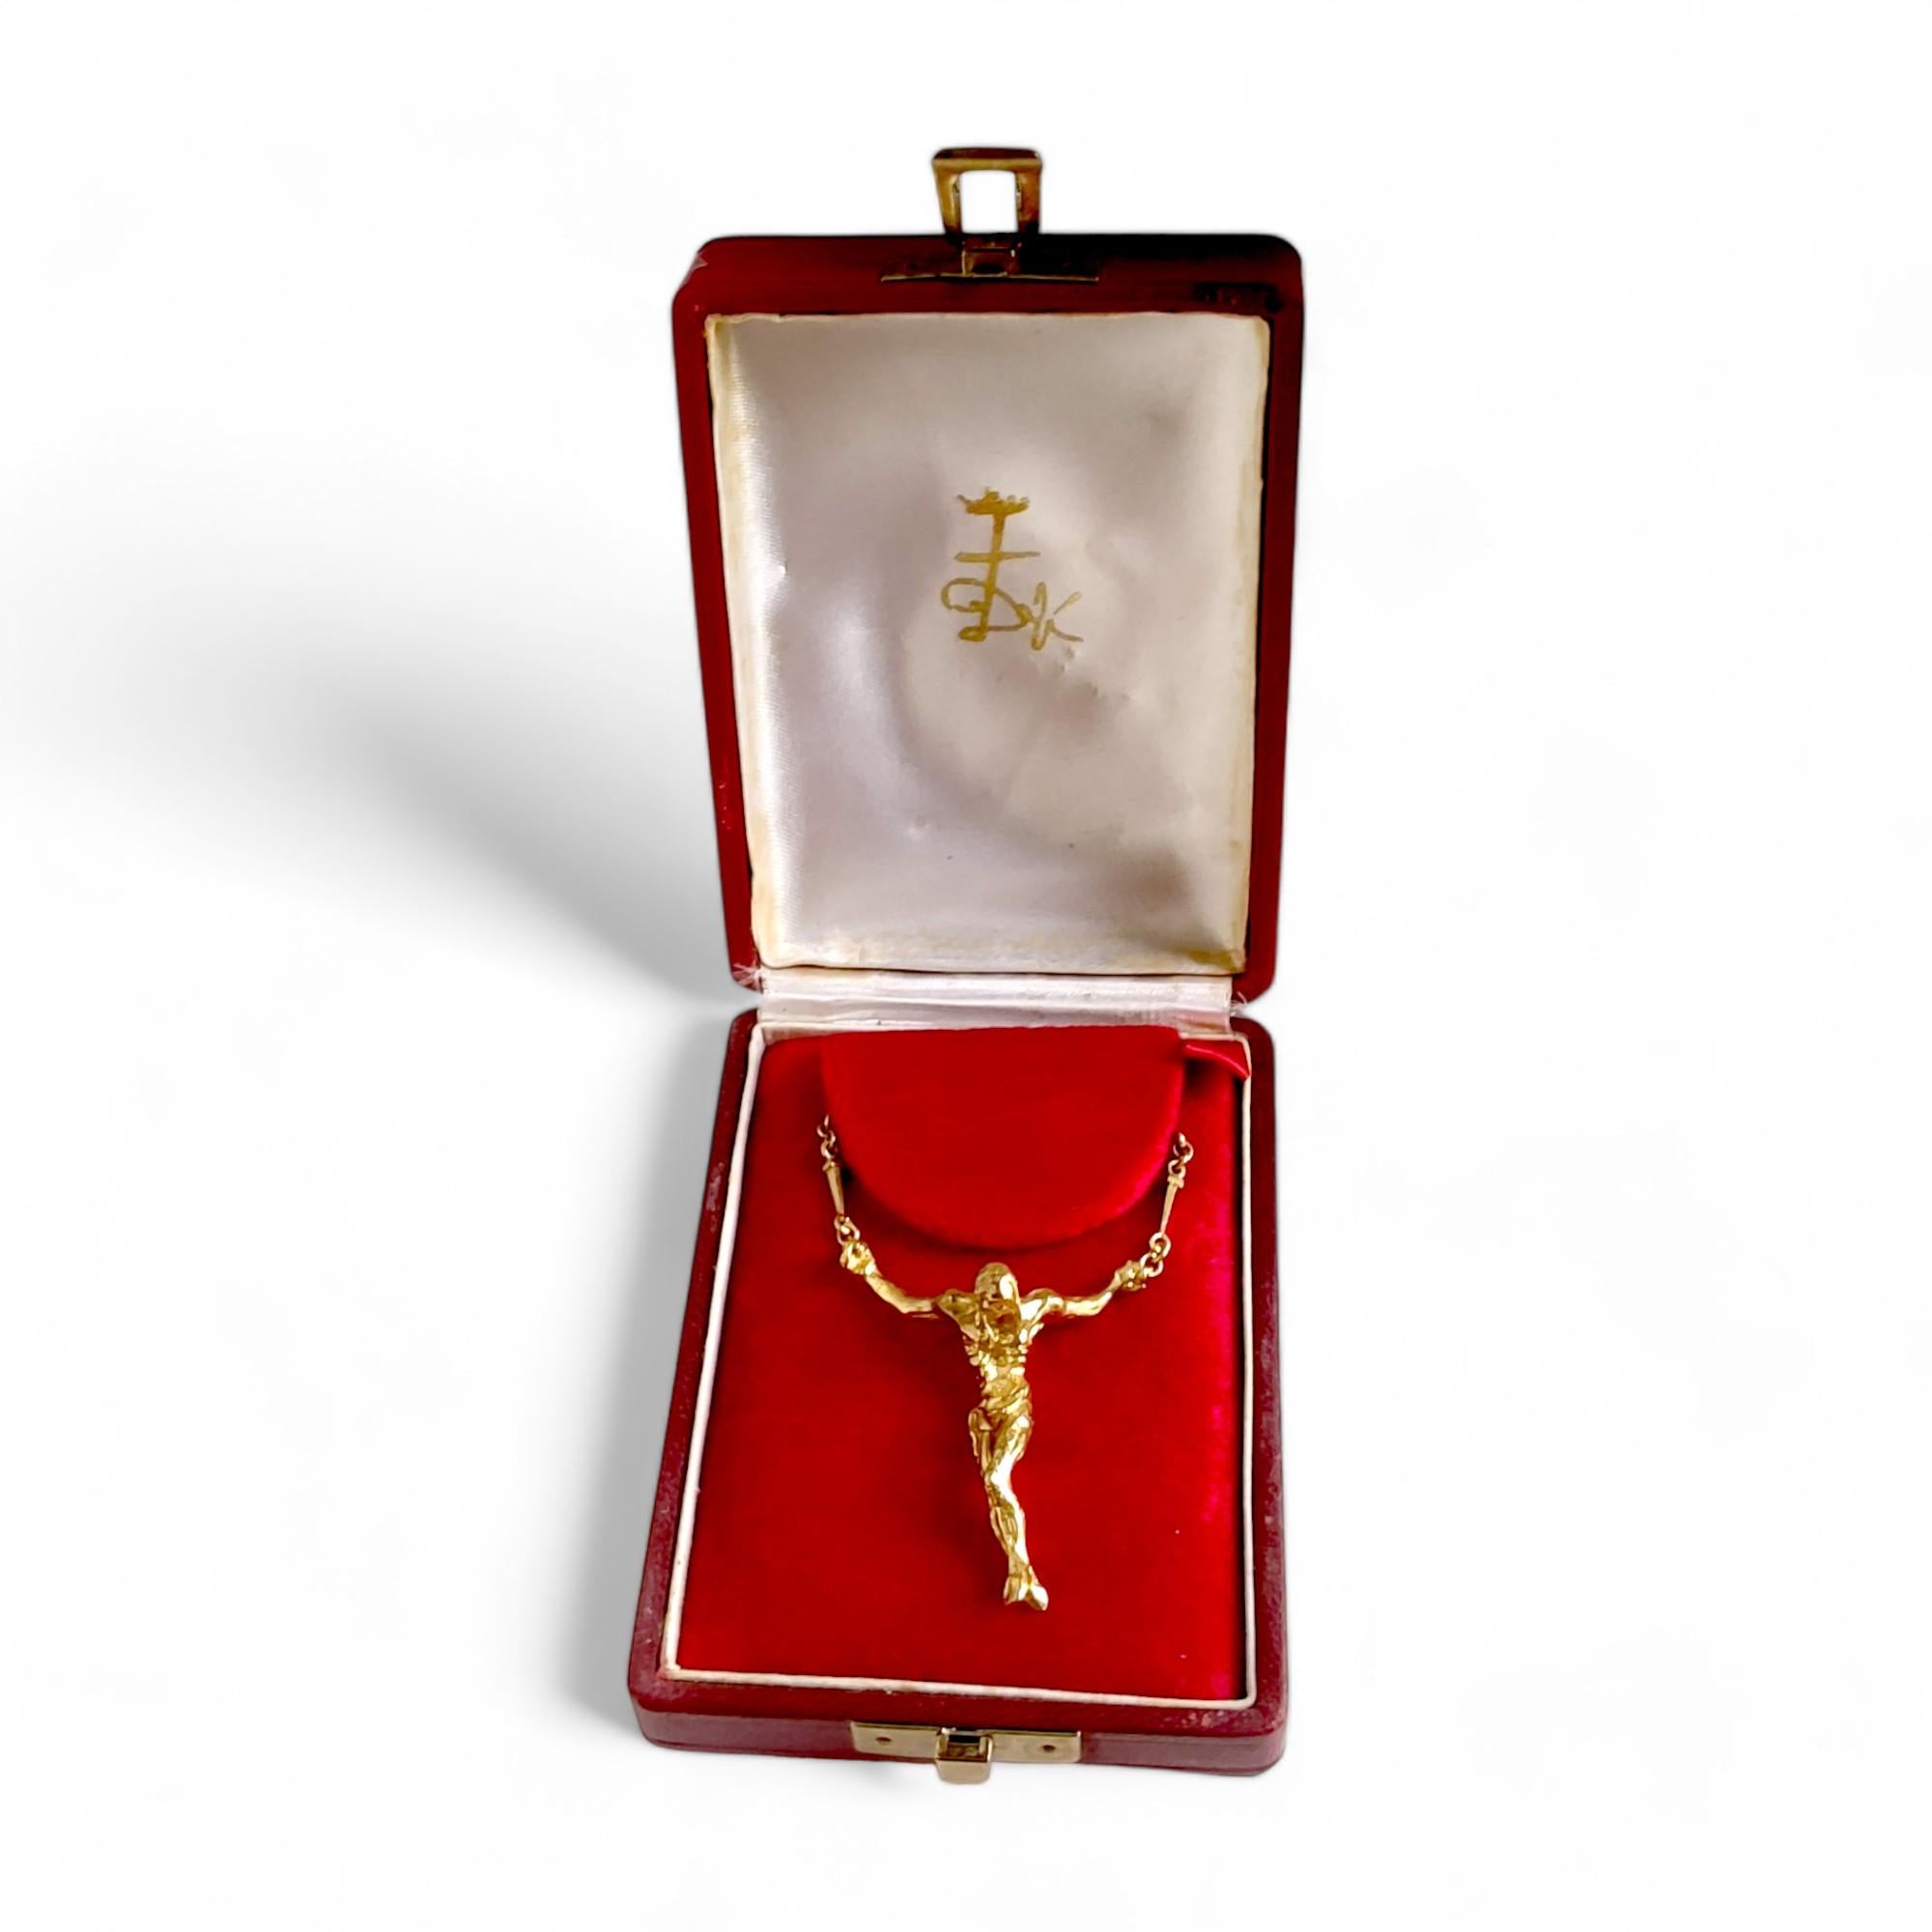 Exclusive Dalí 18K solid gold 'St. John Cross' Necklace #A-821 - With Provenance For Sale 5